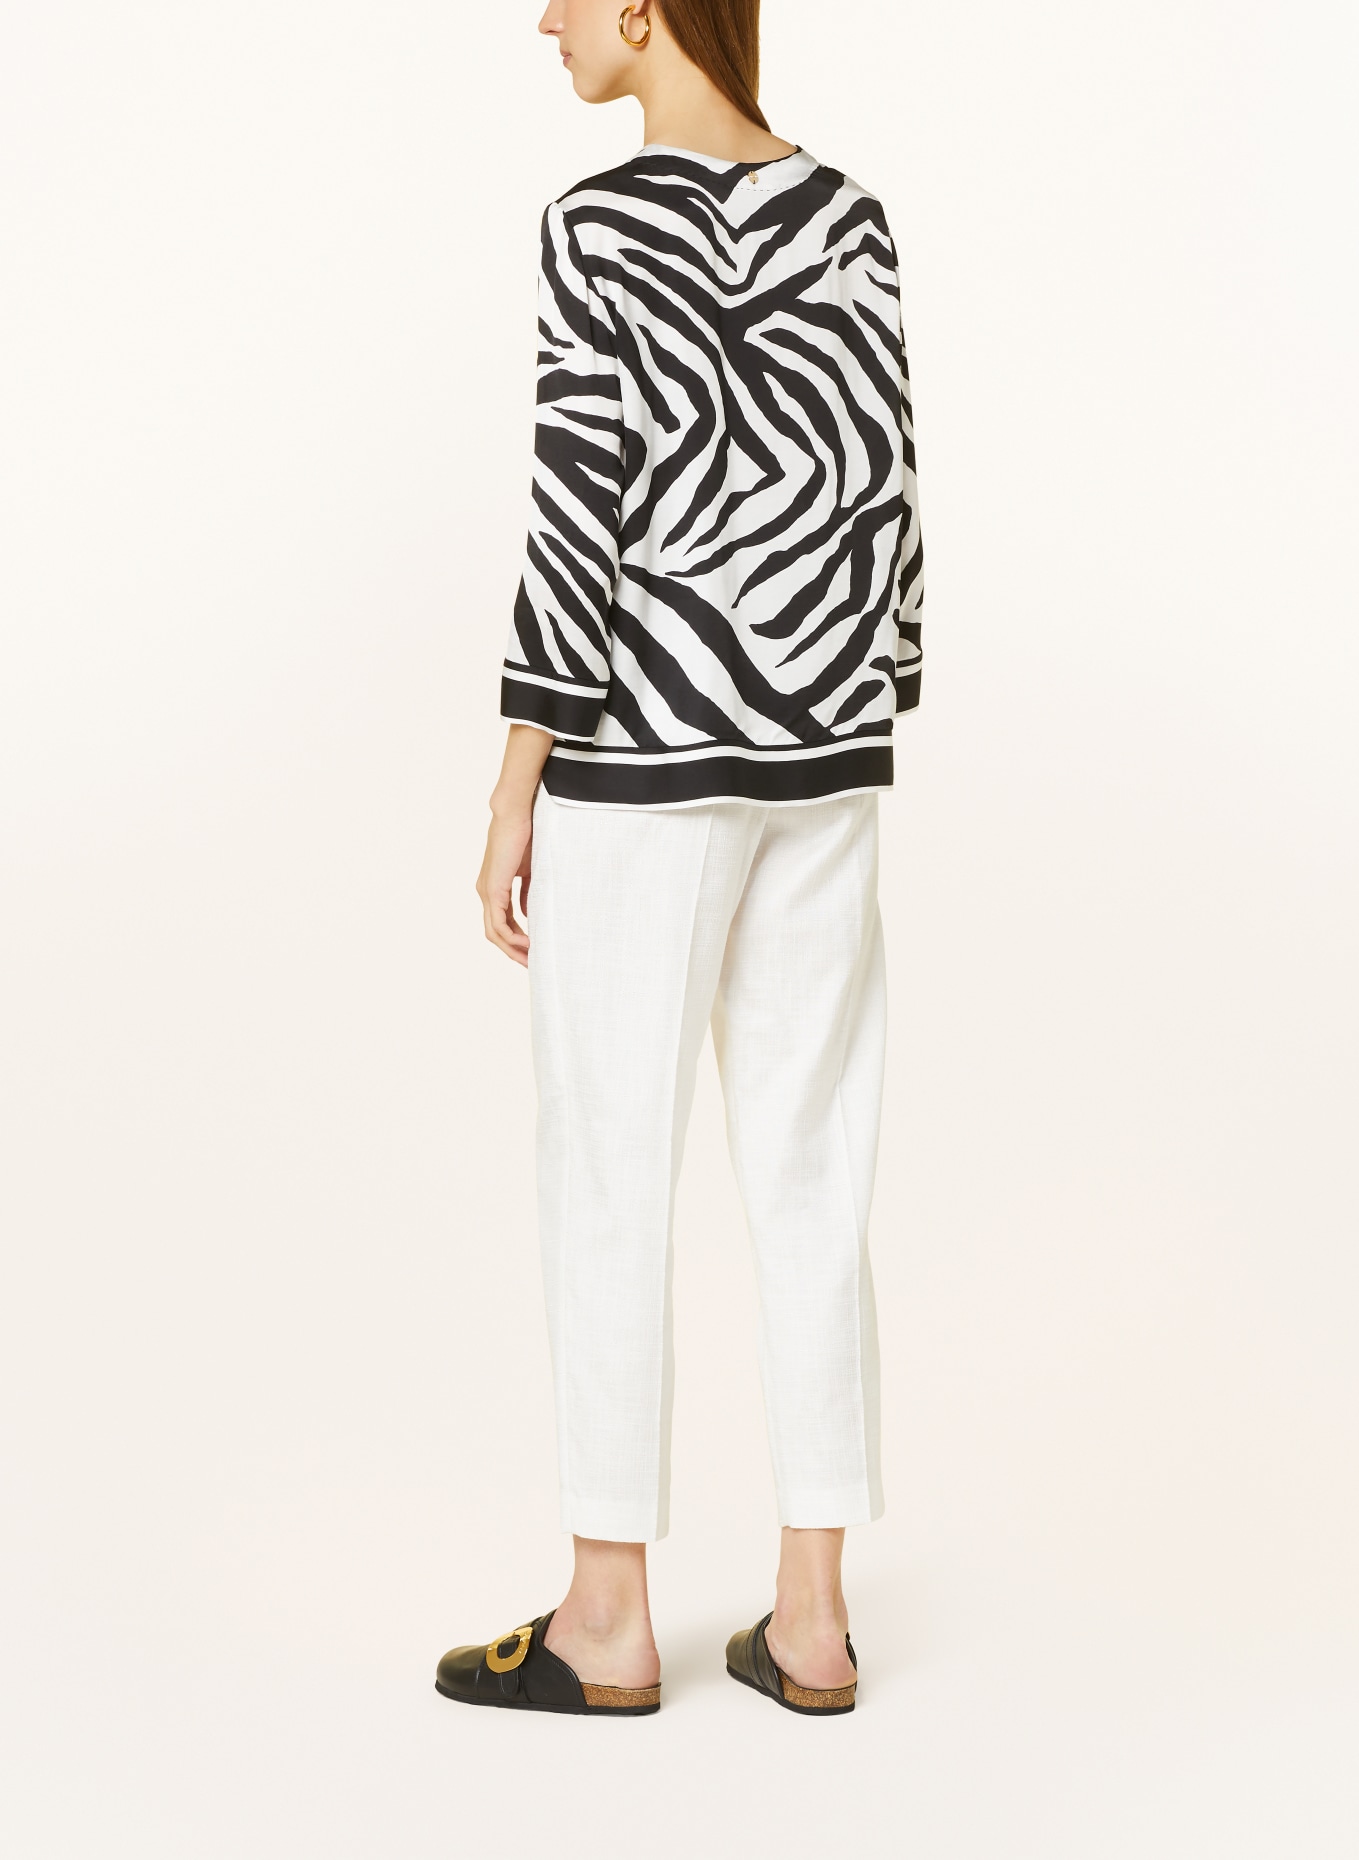 MARC CAIN Shirt blouse made of satin with 3/4 sleeves, Color: 190 white and black (Image 3)